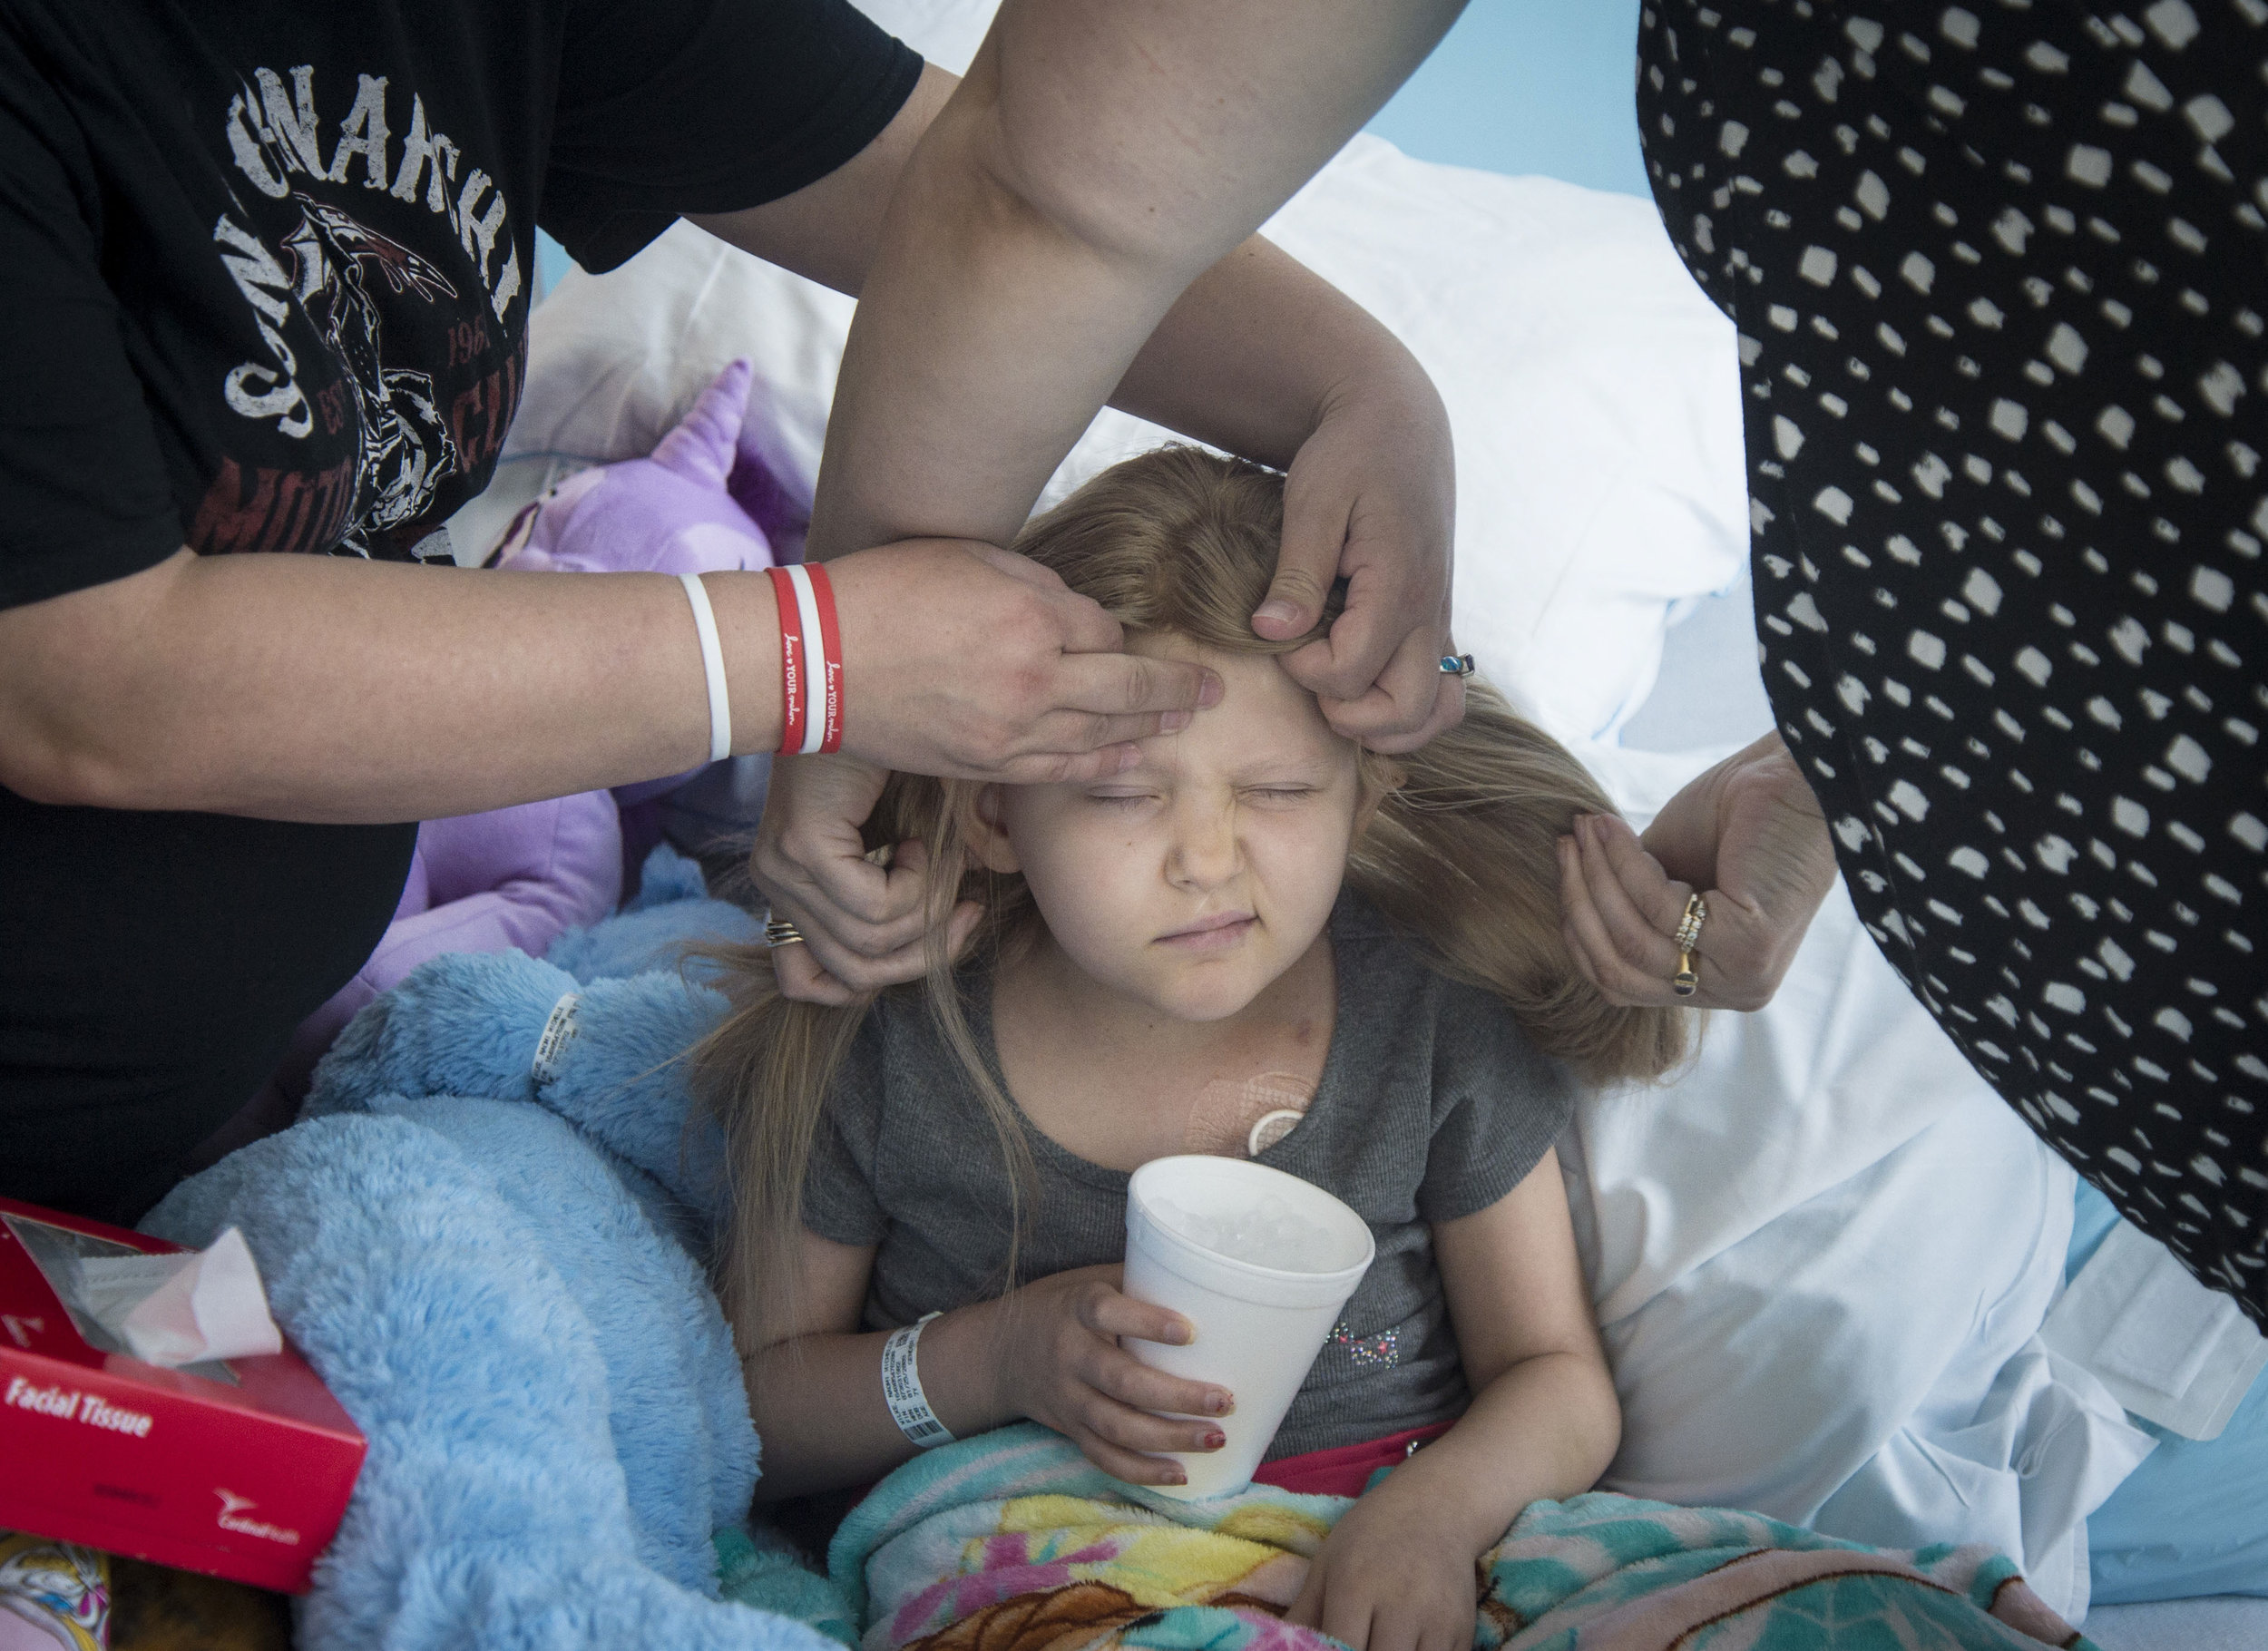  Naomi scrunches her face as her mother Donna and Sharon Potter, the owner of Salon Nouveau, whom delivered her wig made of donated human hair from the charity Children with Hair Loss, fit it on her head. After a long day of chemo and pain from a rec